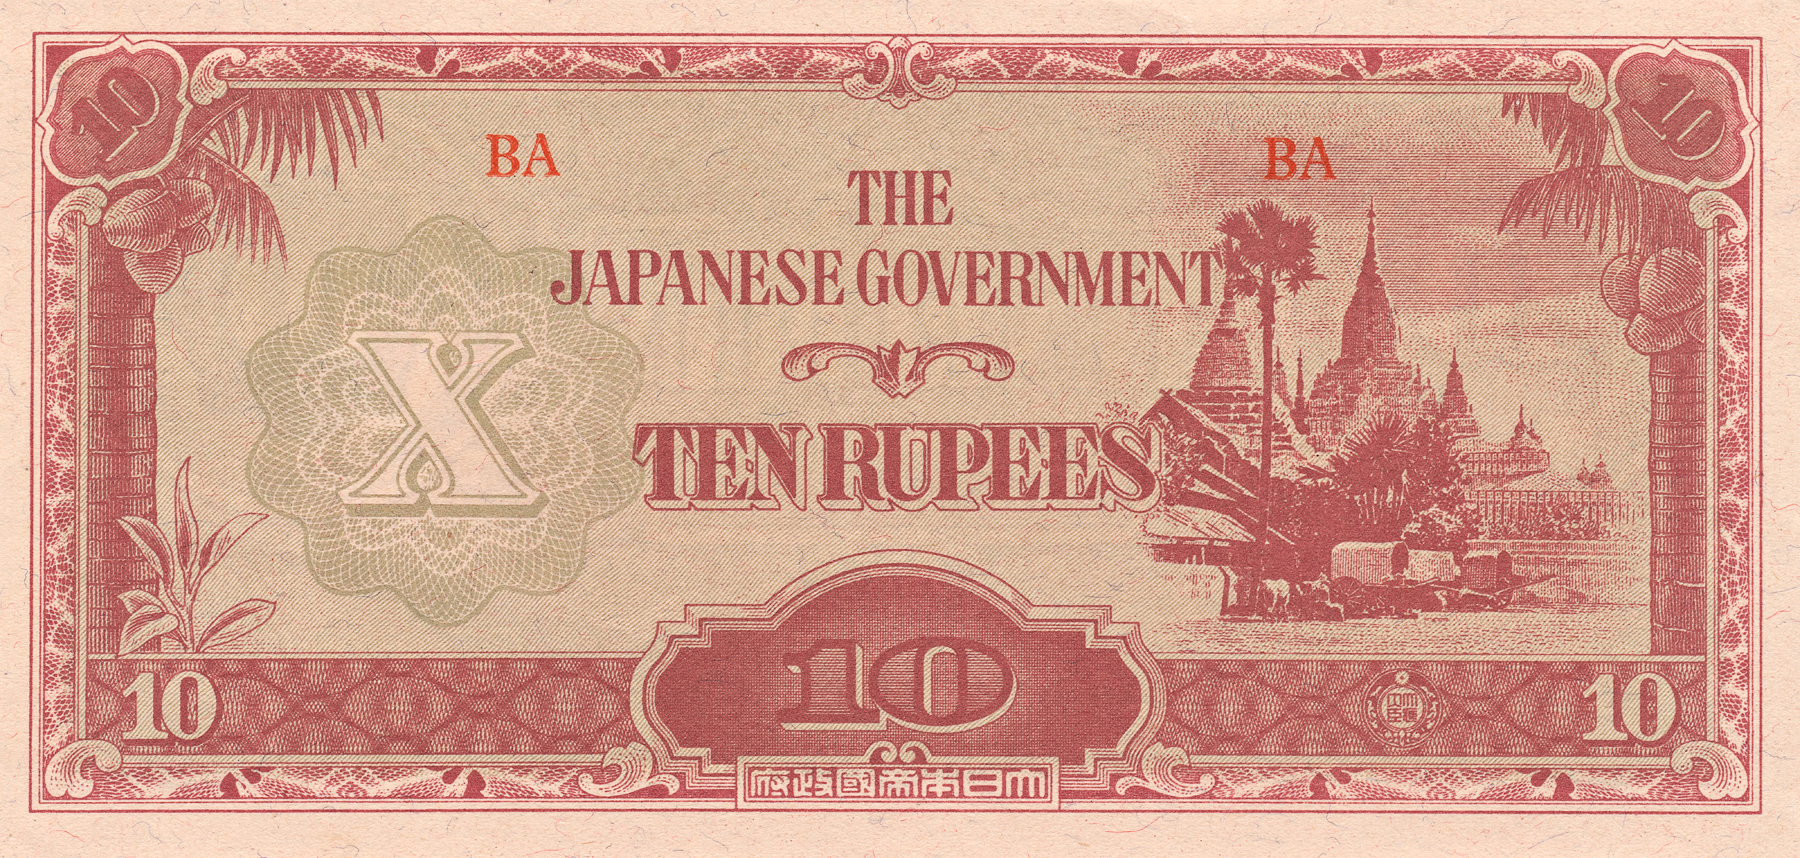 Vintage Banknote - Japanese Government, 10, Ornate, Red, Rectangular, HQ Photo